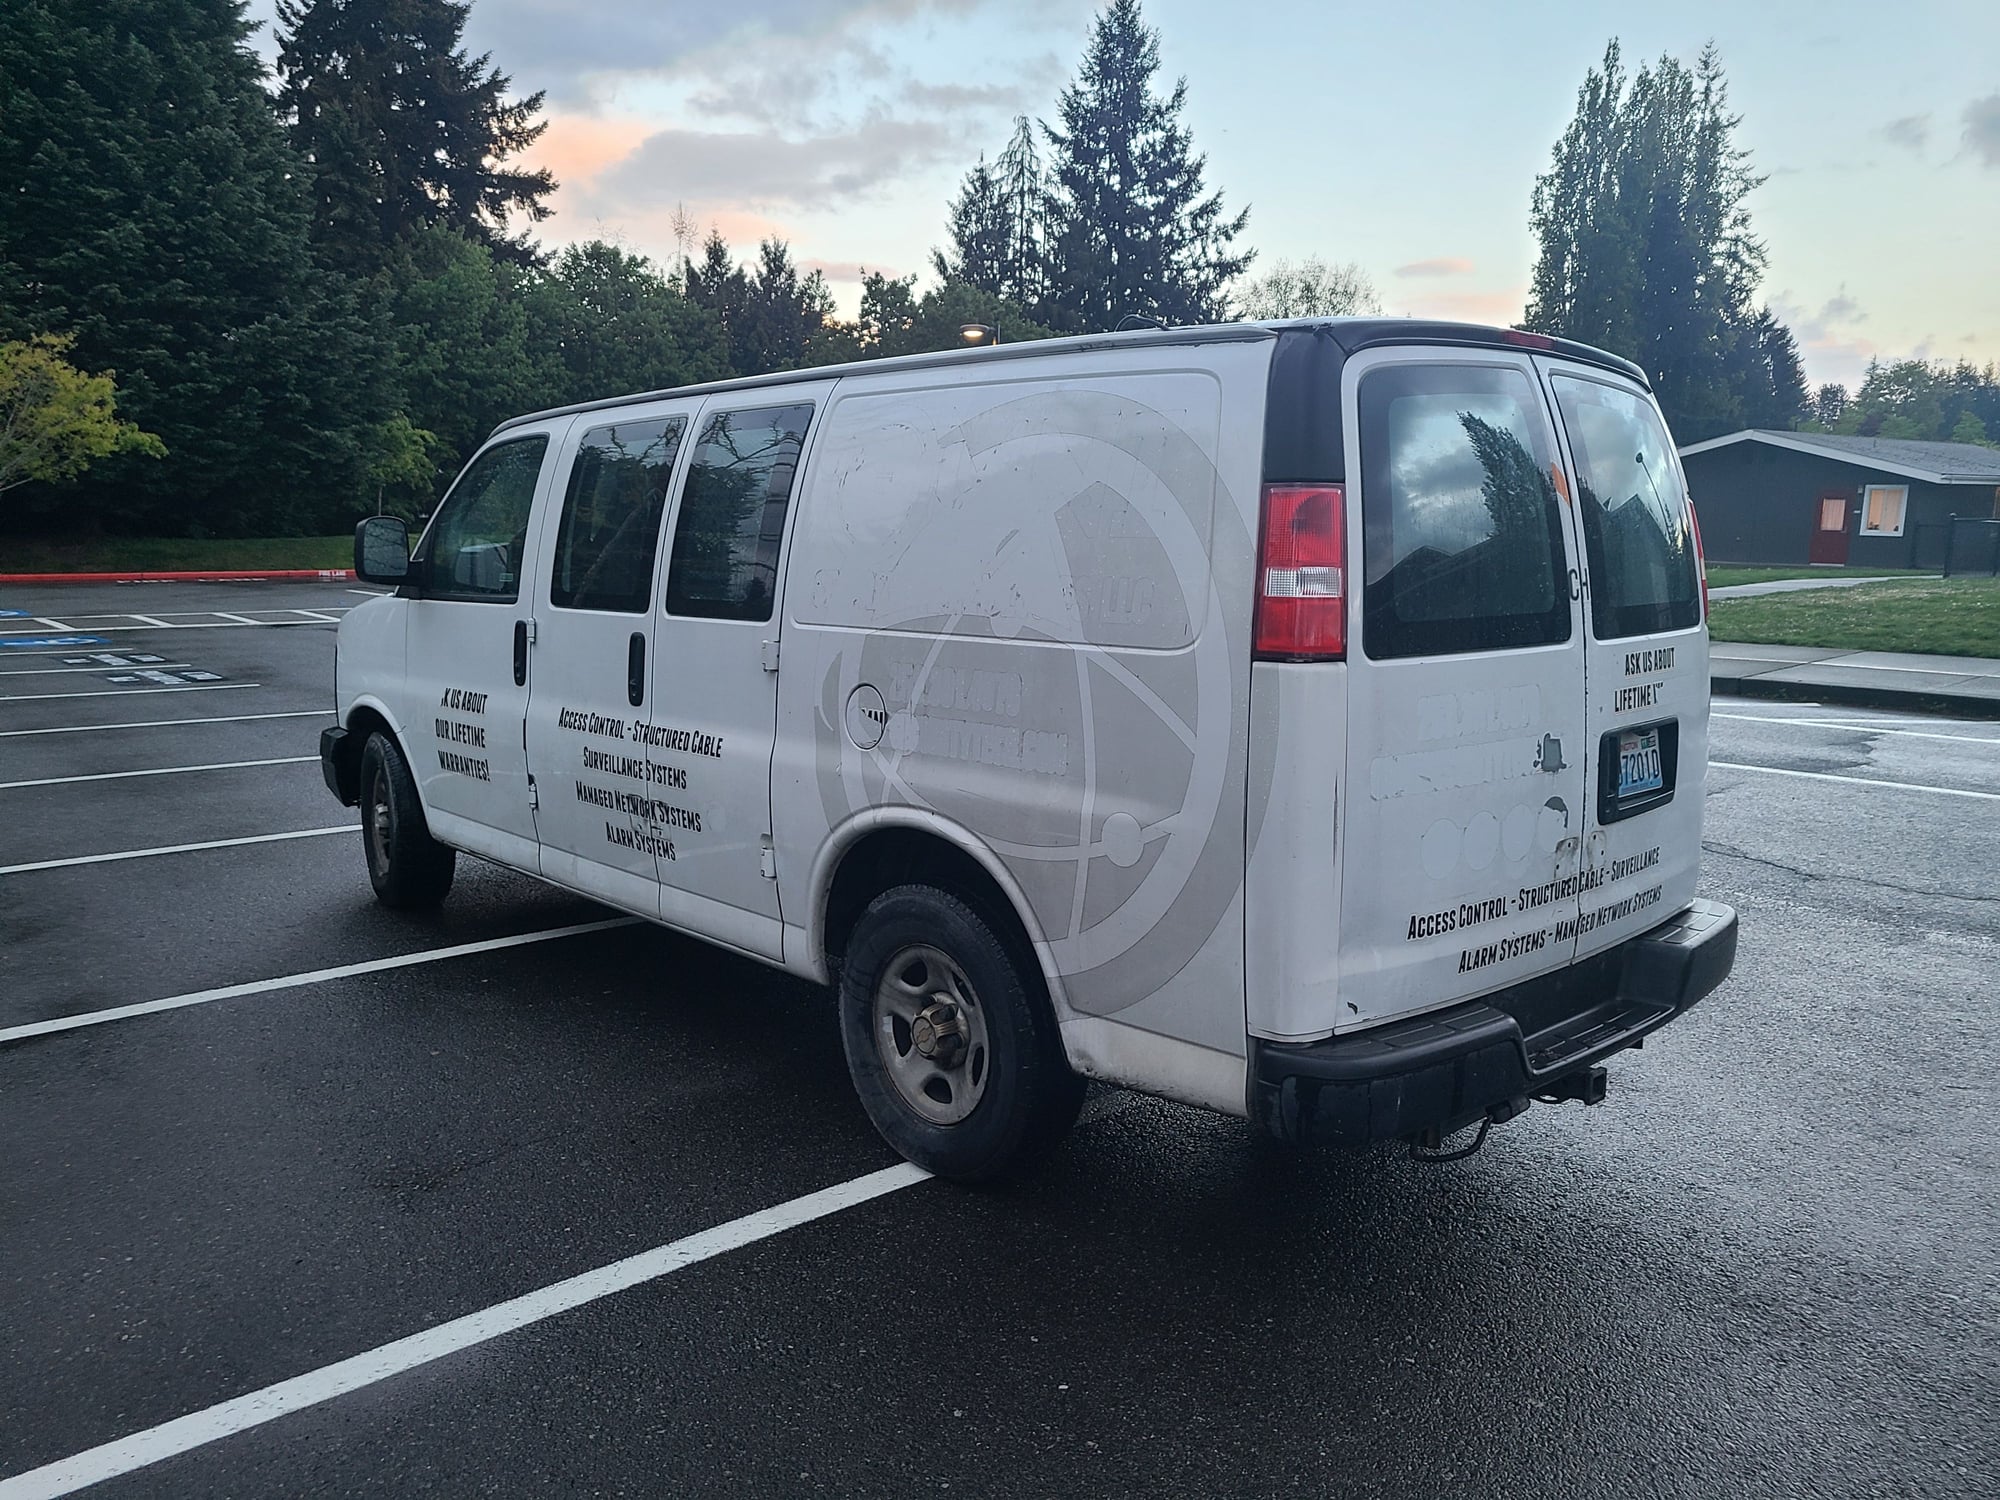 2005 Chevrolet Express 1500 - 2005 Chevrolet Express 1500 AWD Cargo - Used - VIN 1GCFH15T151179307 - 236,200 Miles - 8 cyl - AWD - Automatic - Van - White - Bellevue, WA 98008, United States